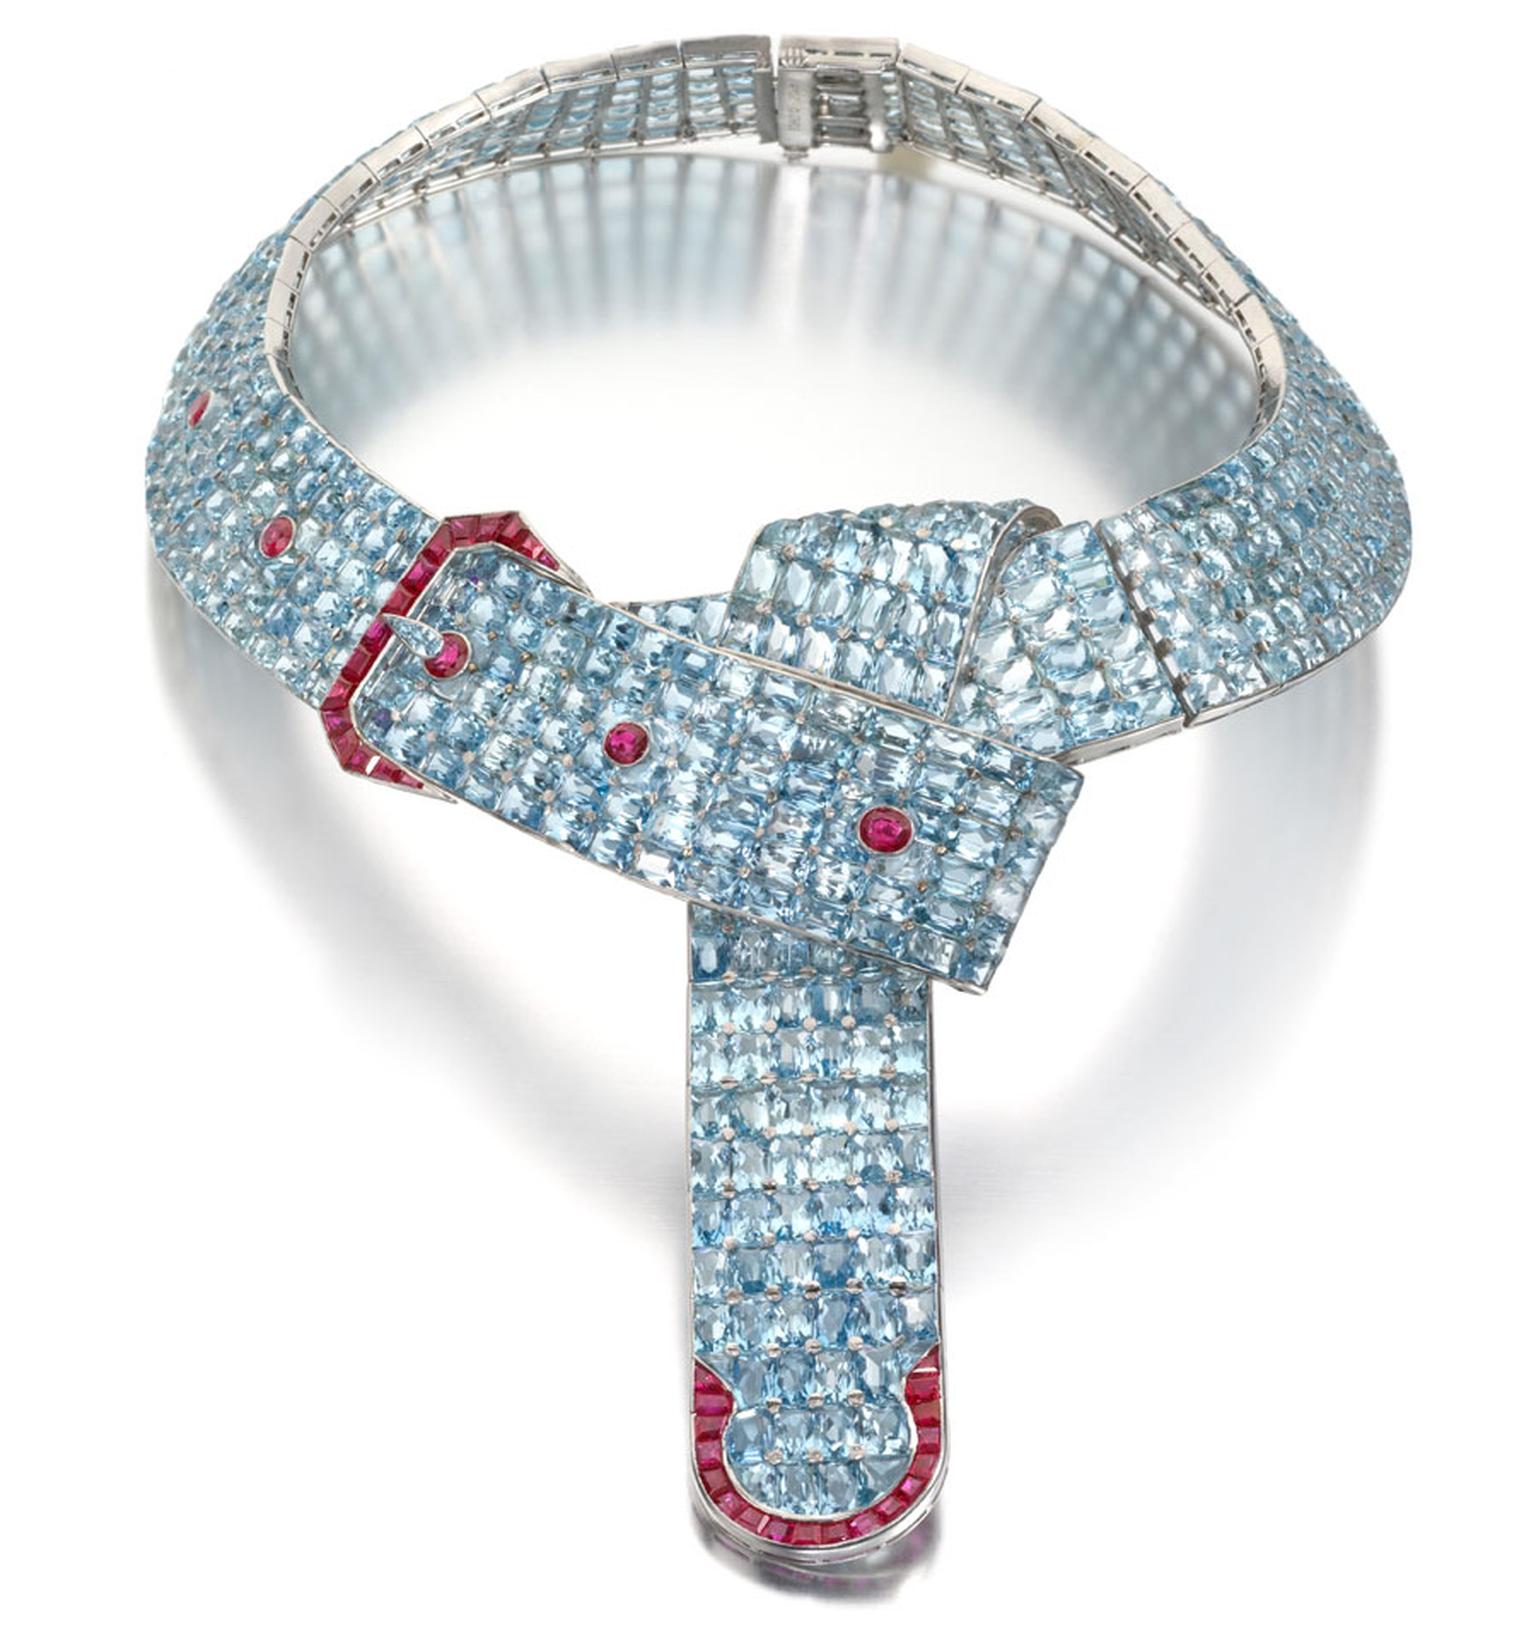 MPL-2013-Siegelson-aquamarine-and-ruby-belt-with-buckle-necklace-designed-by-fulco-duke-of-Verdura-for-Paul-Flat-circa-1935.jpg